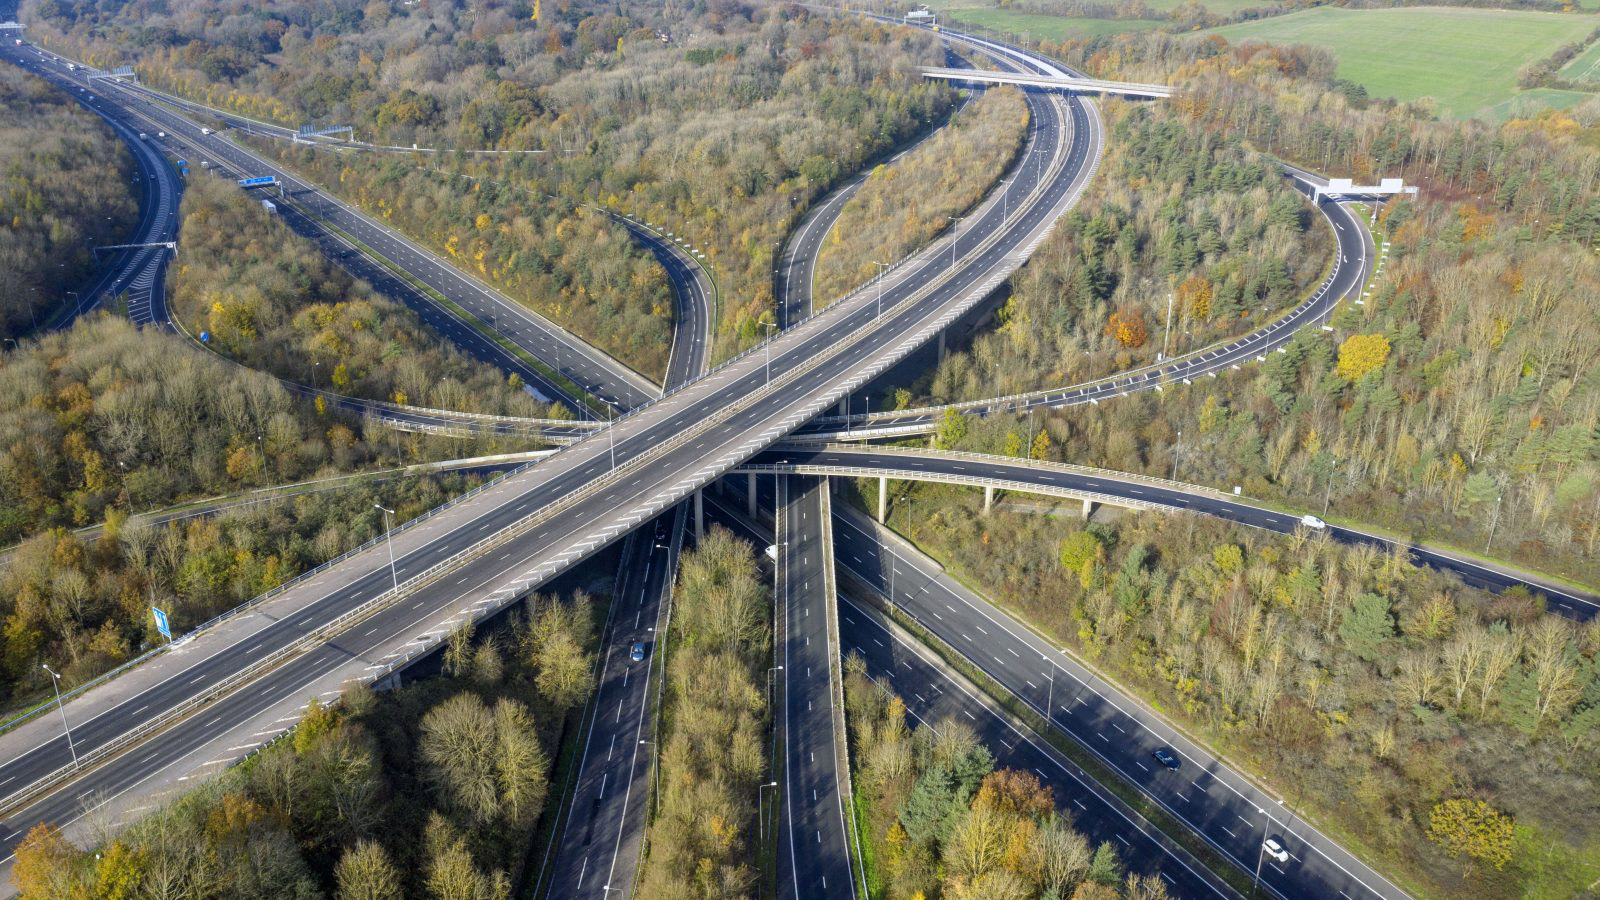 An aerial view of the M25/M23 junction in England, empty of vehicles